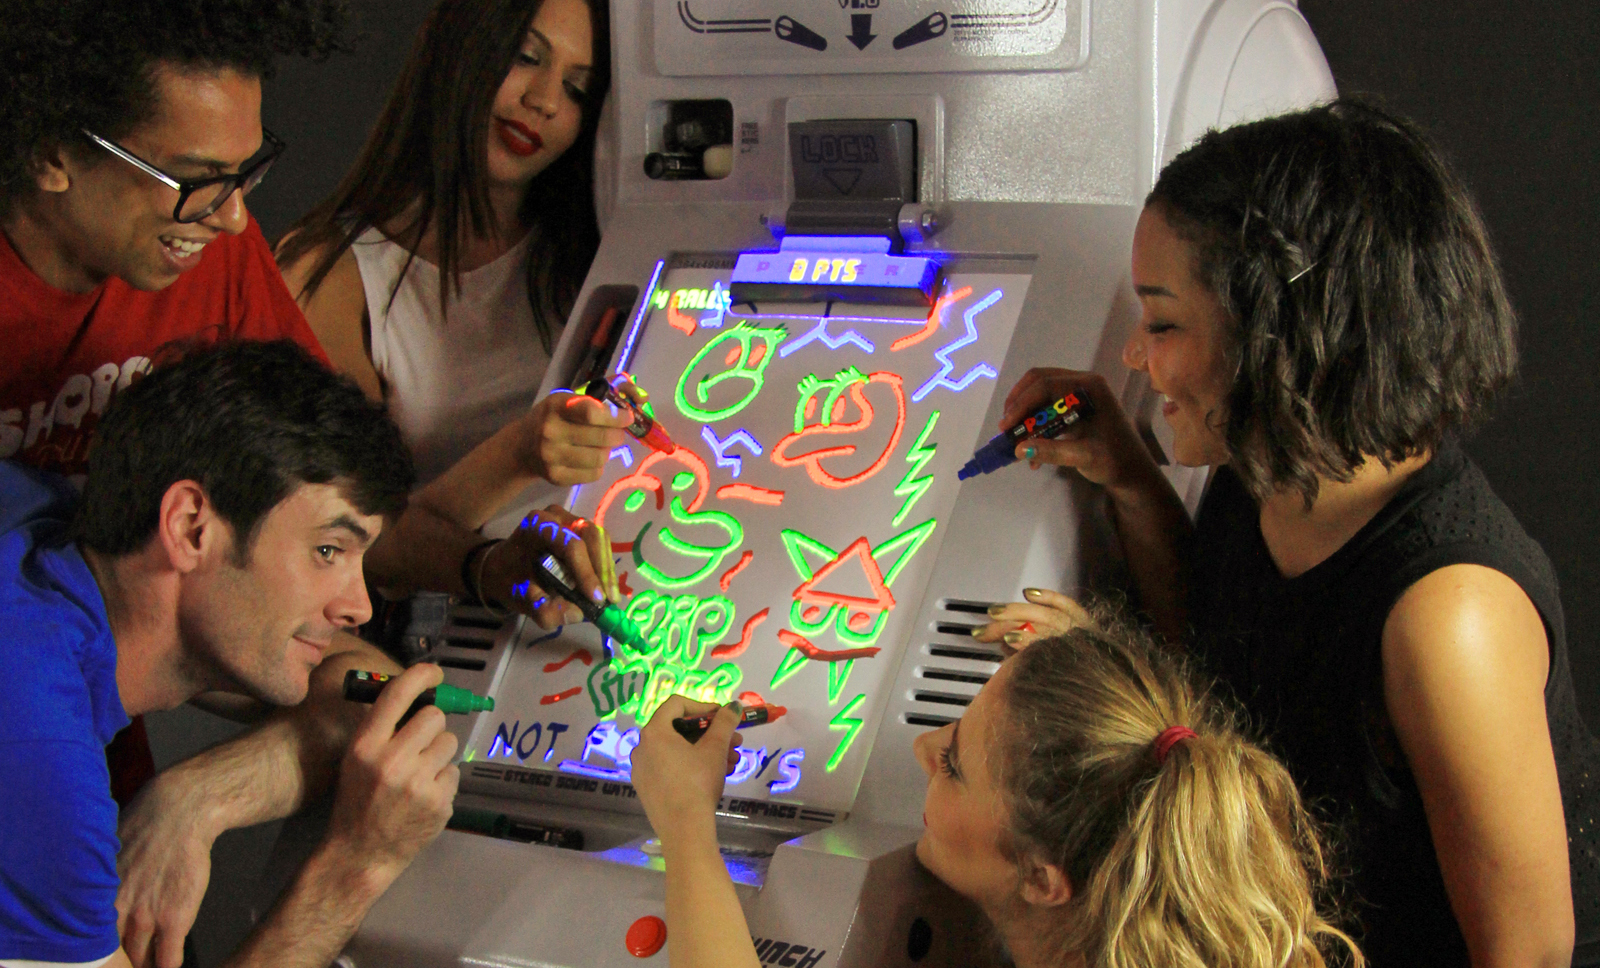 You Can Draw Your Own Obstacles And Power-Ups On This Weird Pinball Machine